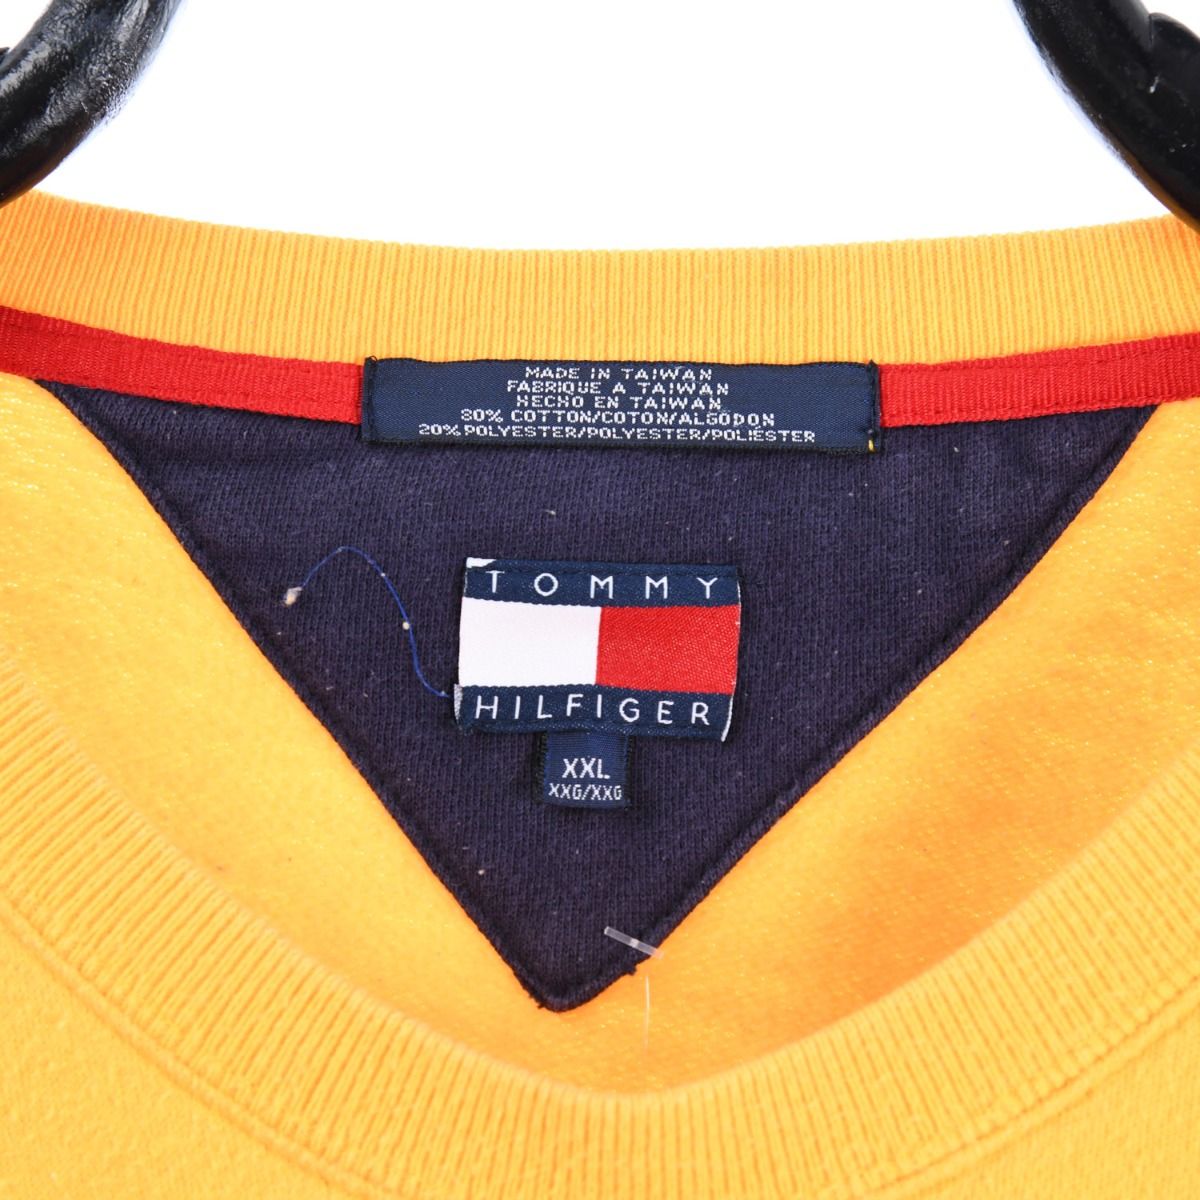 Tommy Hilfiger Embroidered Spell Out Sweatshirt